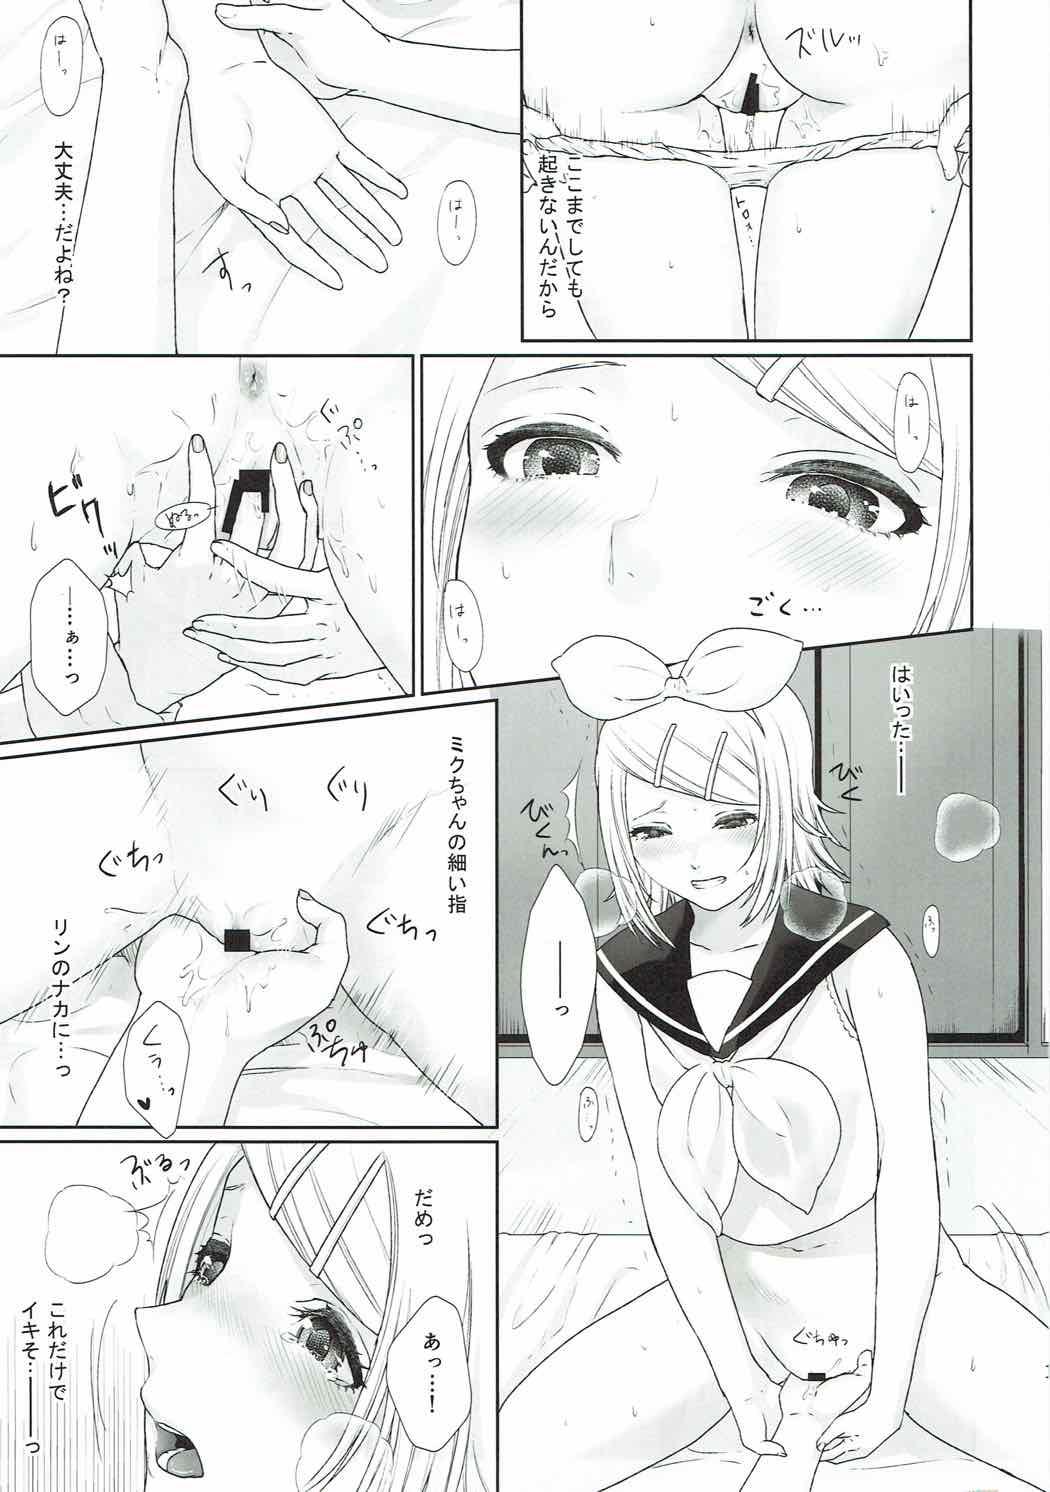 Old And Young Gaman Dekinai! - Vocaloid Moneytalks - Page 9